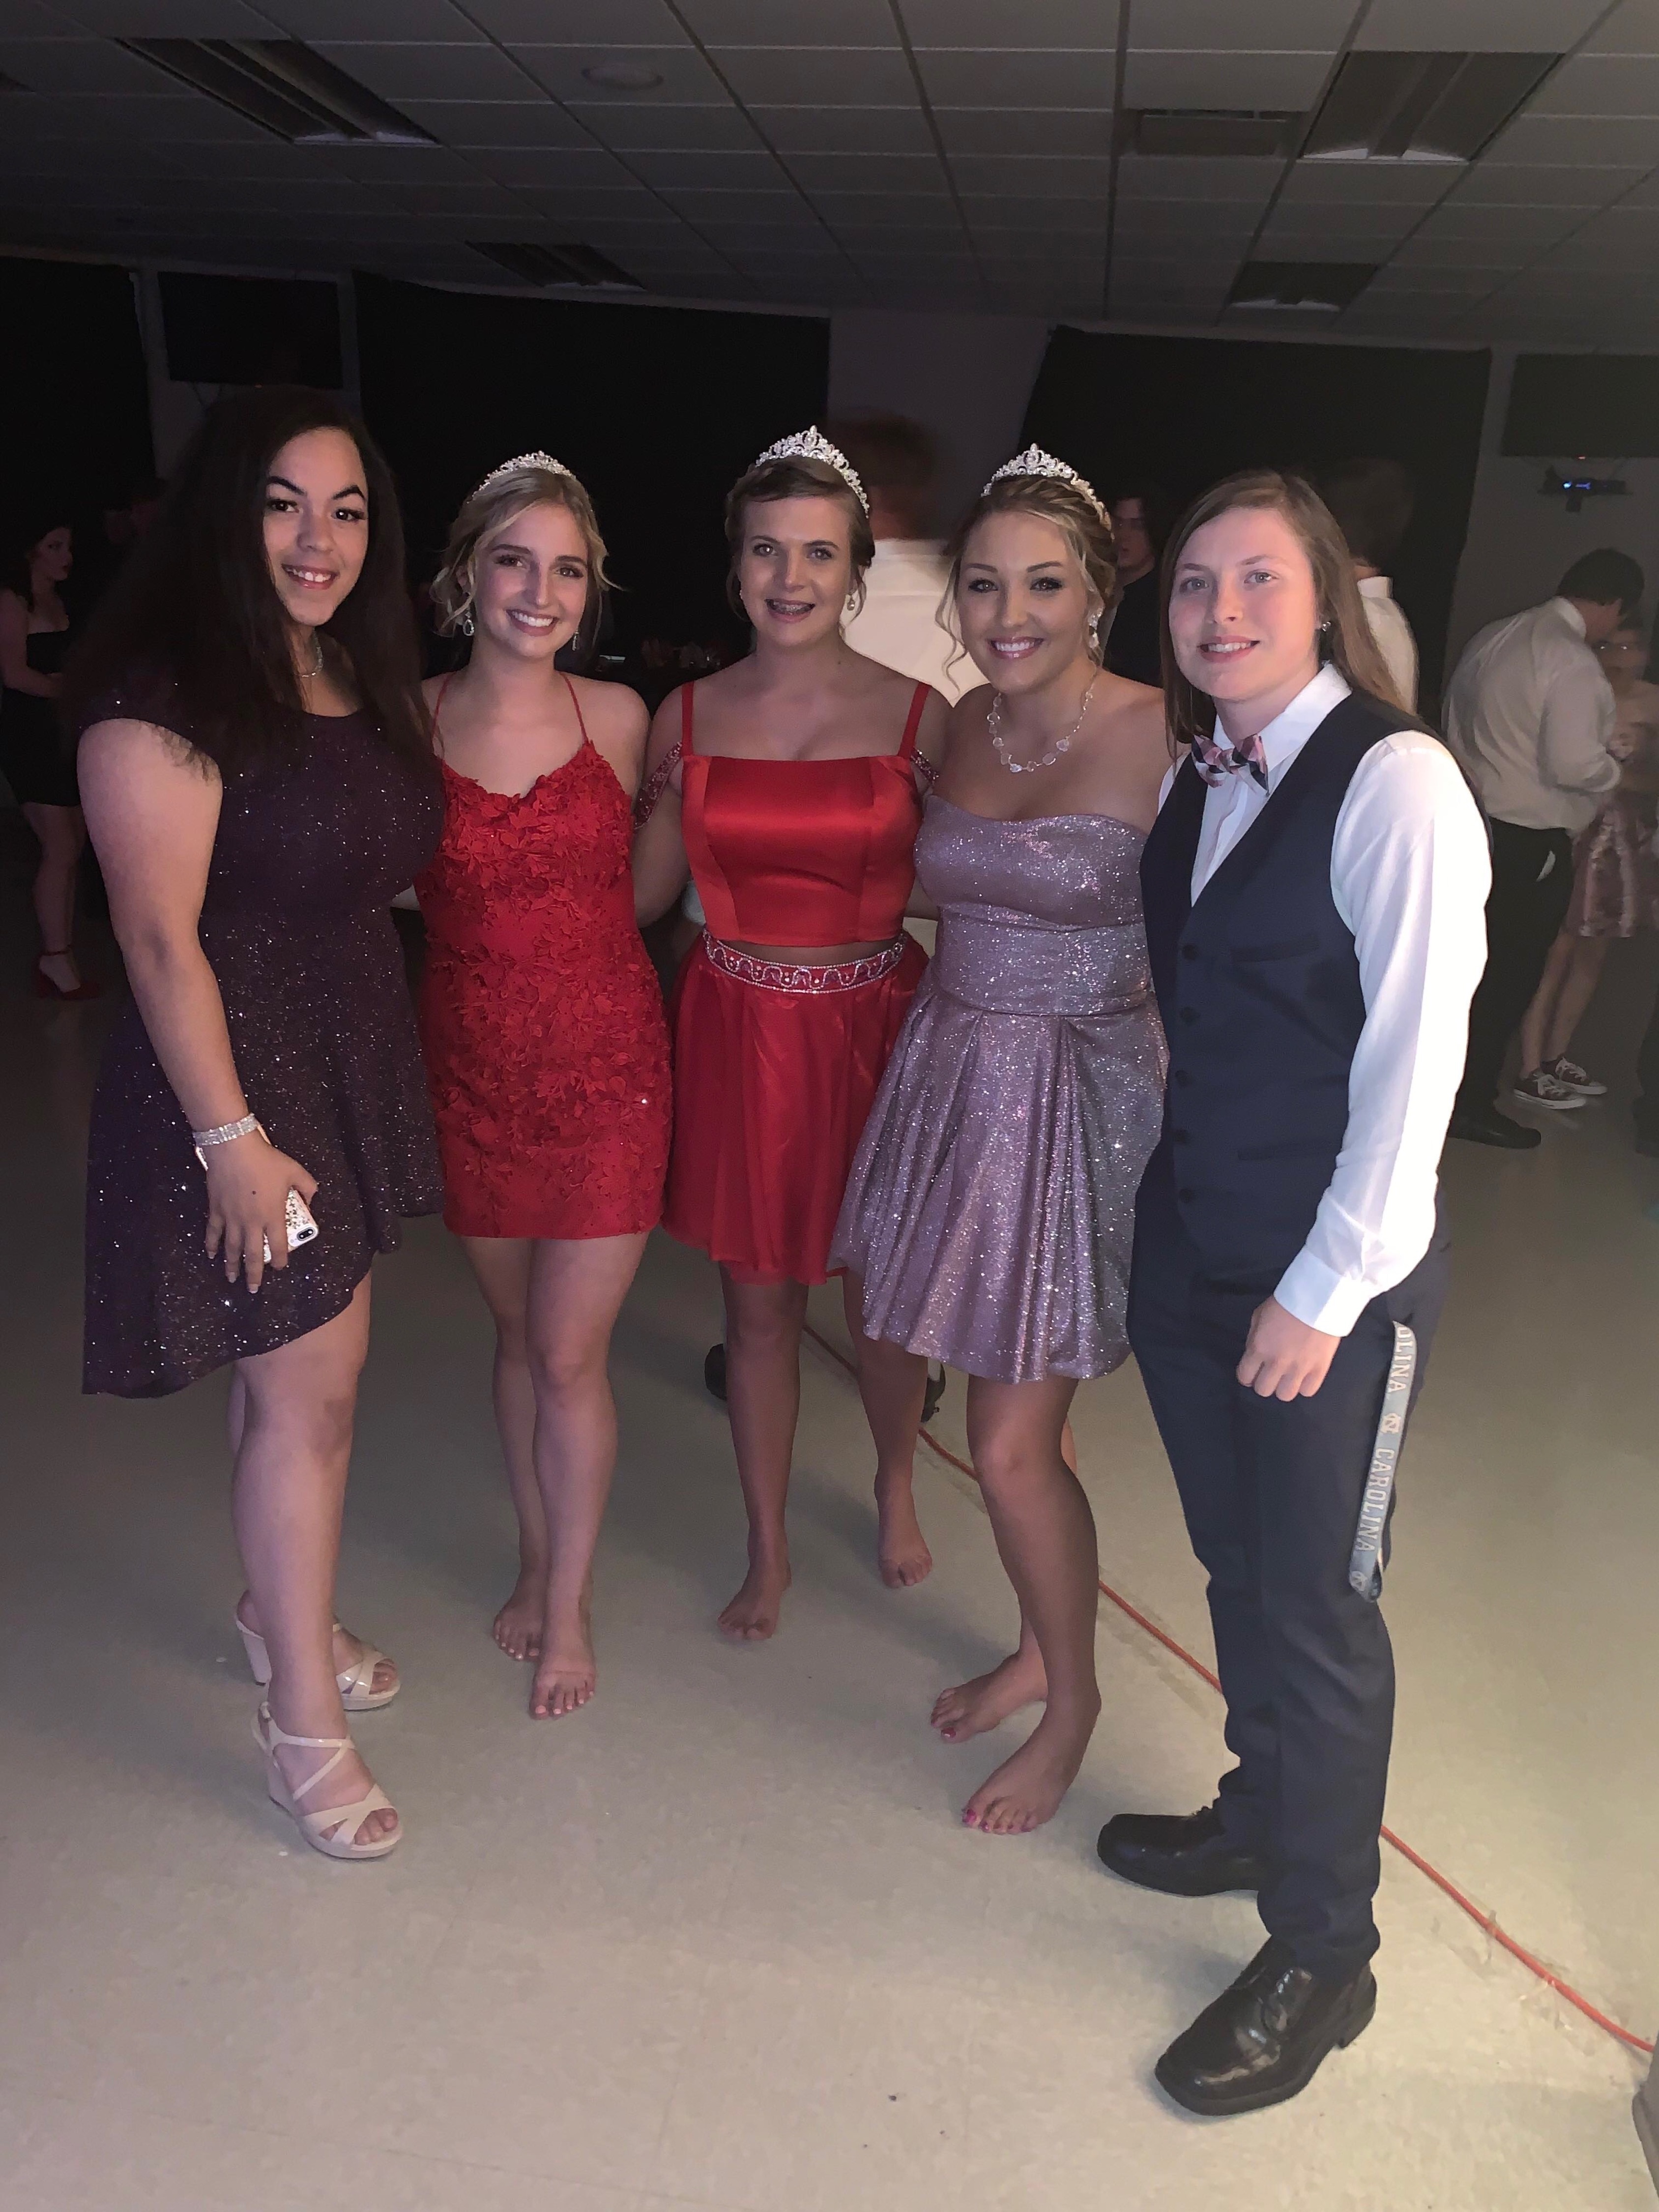 Students in their homecoming 2019